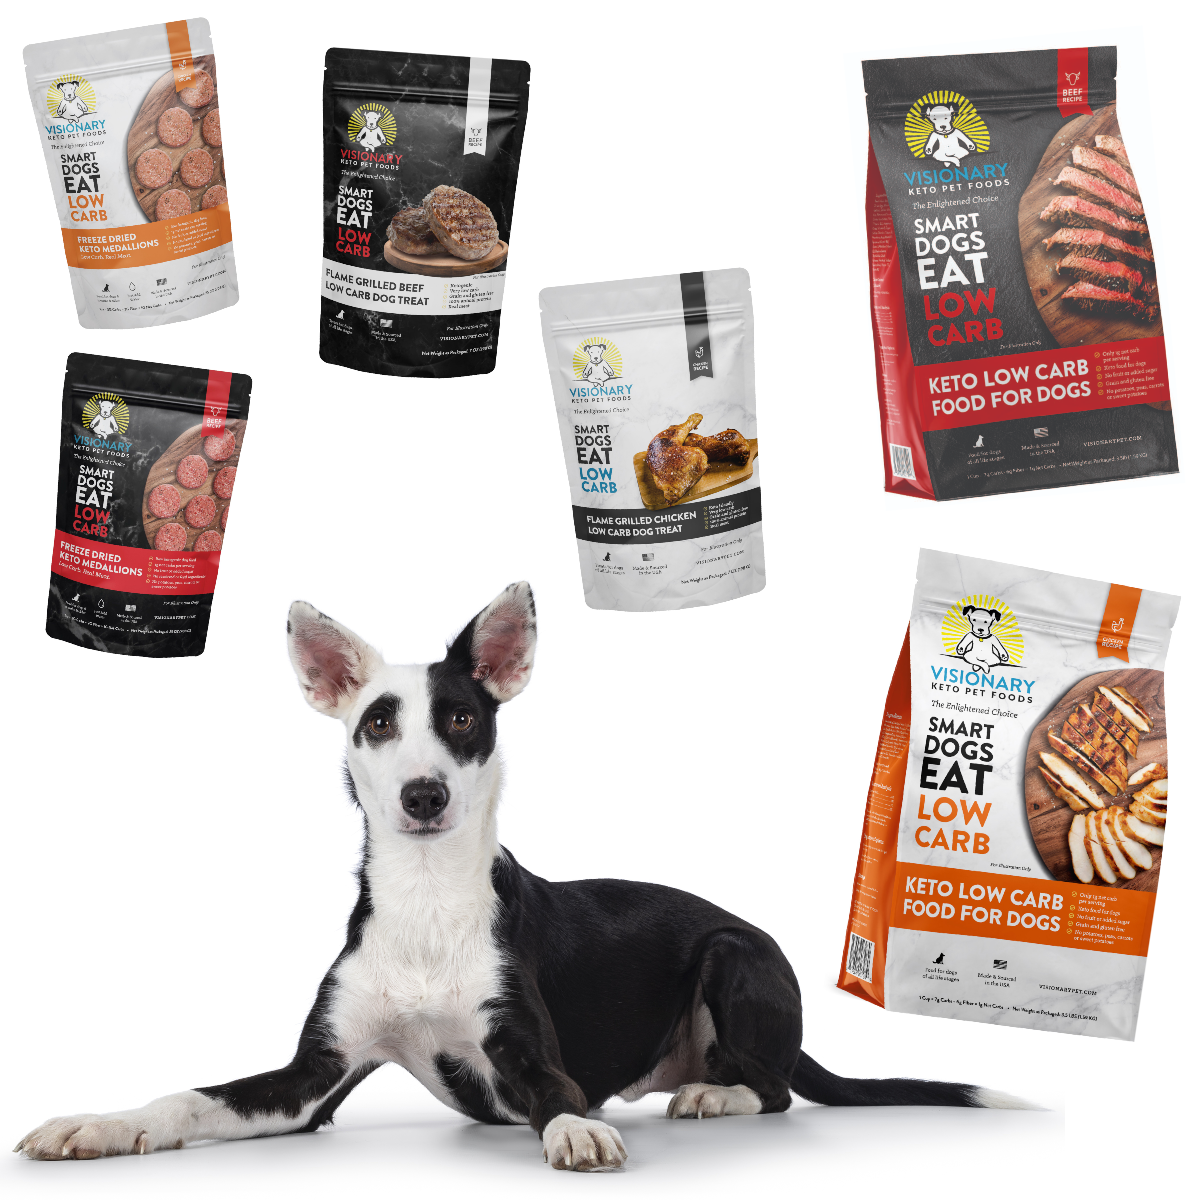 Keto Food for dogs